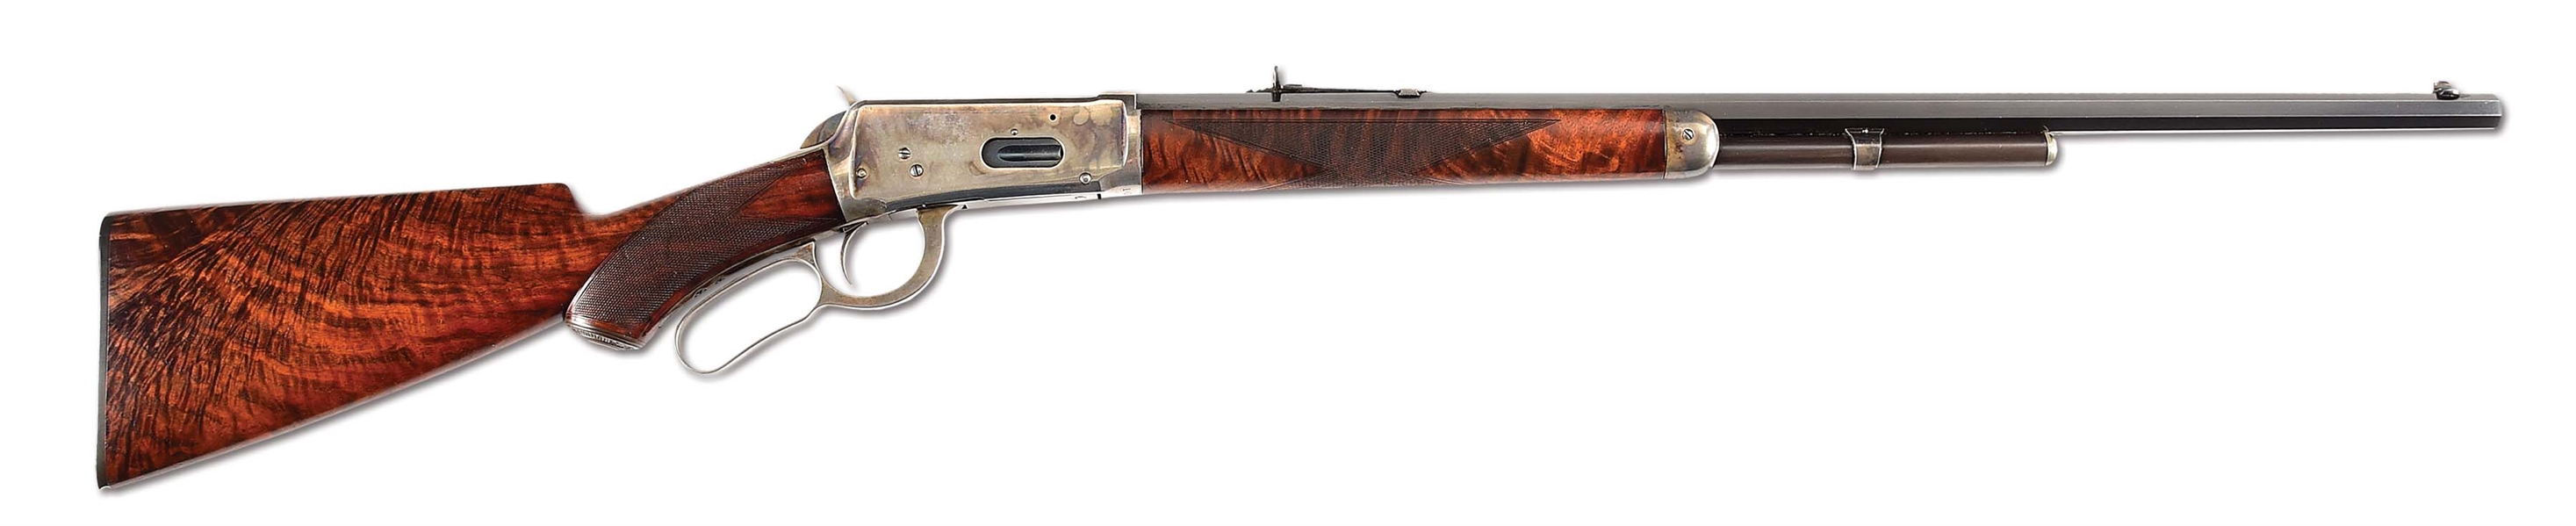 (A) RARE WINCHESTER MODEL 1894 DELUXE RIFLE WITH FACTORY CASE HARDENED FRAME.